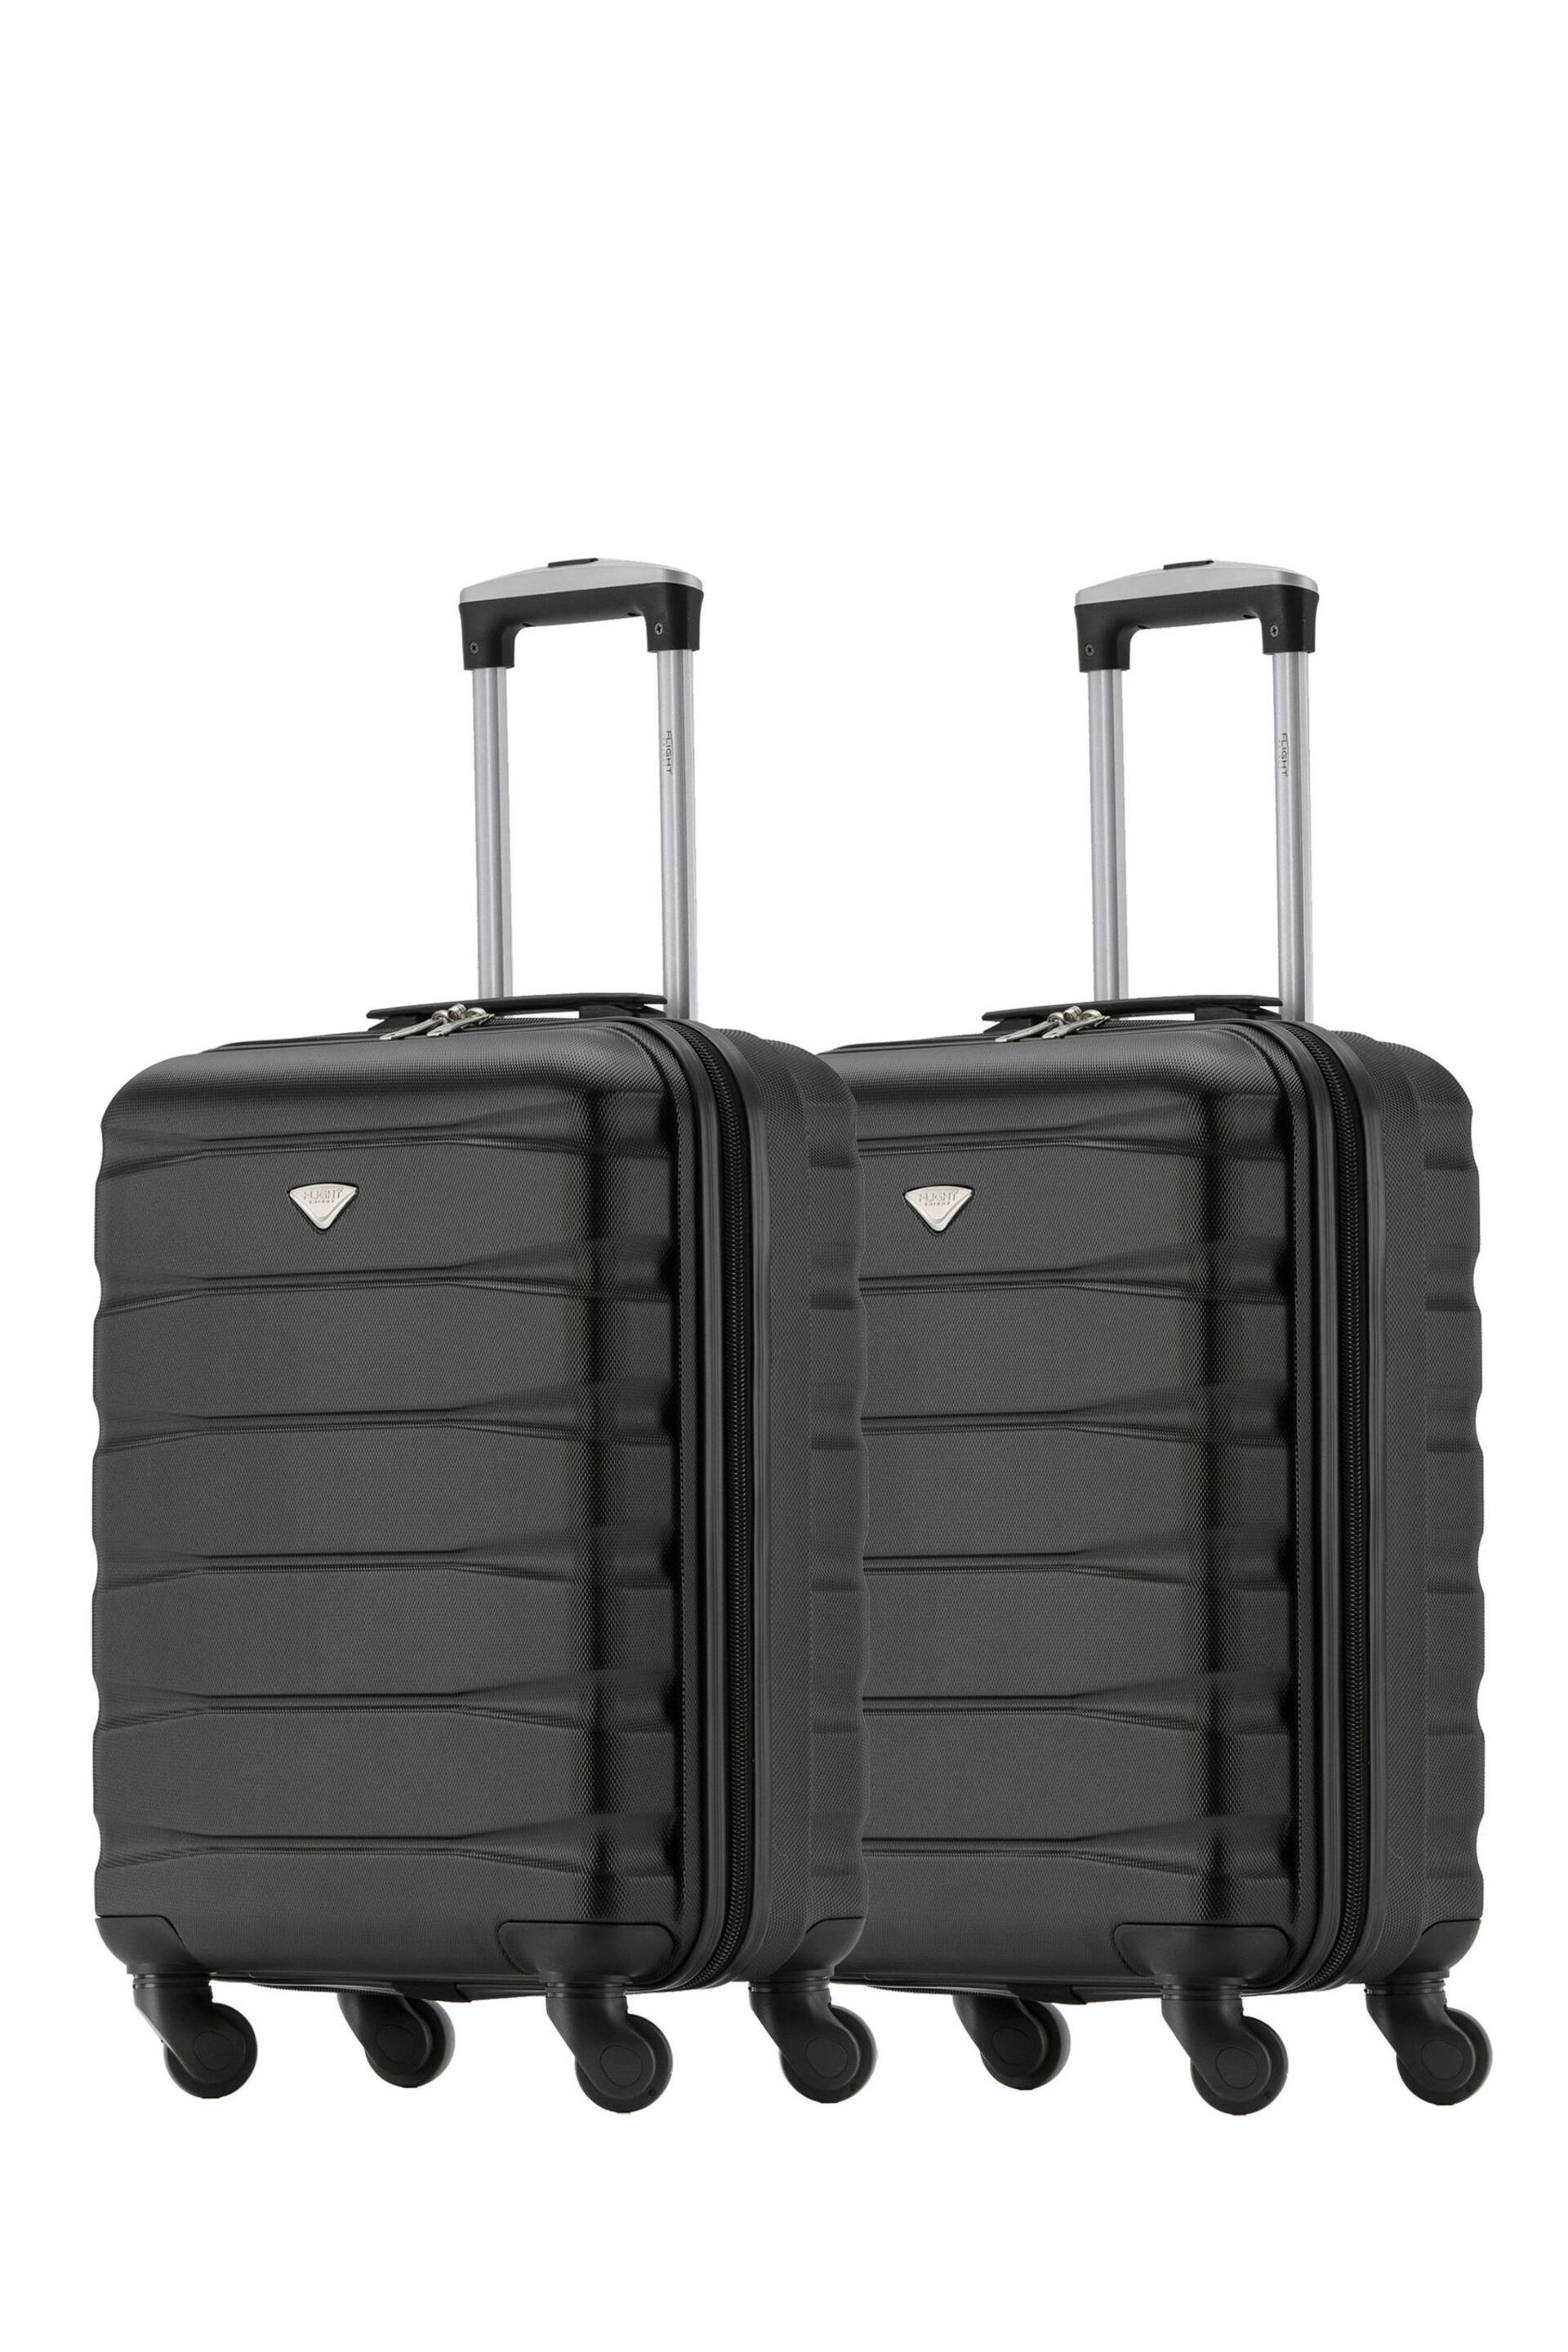 Flight Knight Ryanair Priority 4 Wheel ABS Hard Case Cabin Carry On Suitcase 55x40x20cm  Set Of 2 - Image 1 of 9